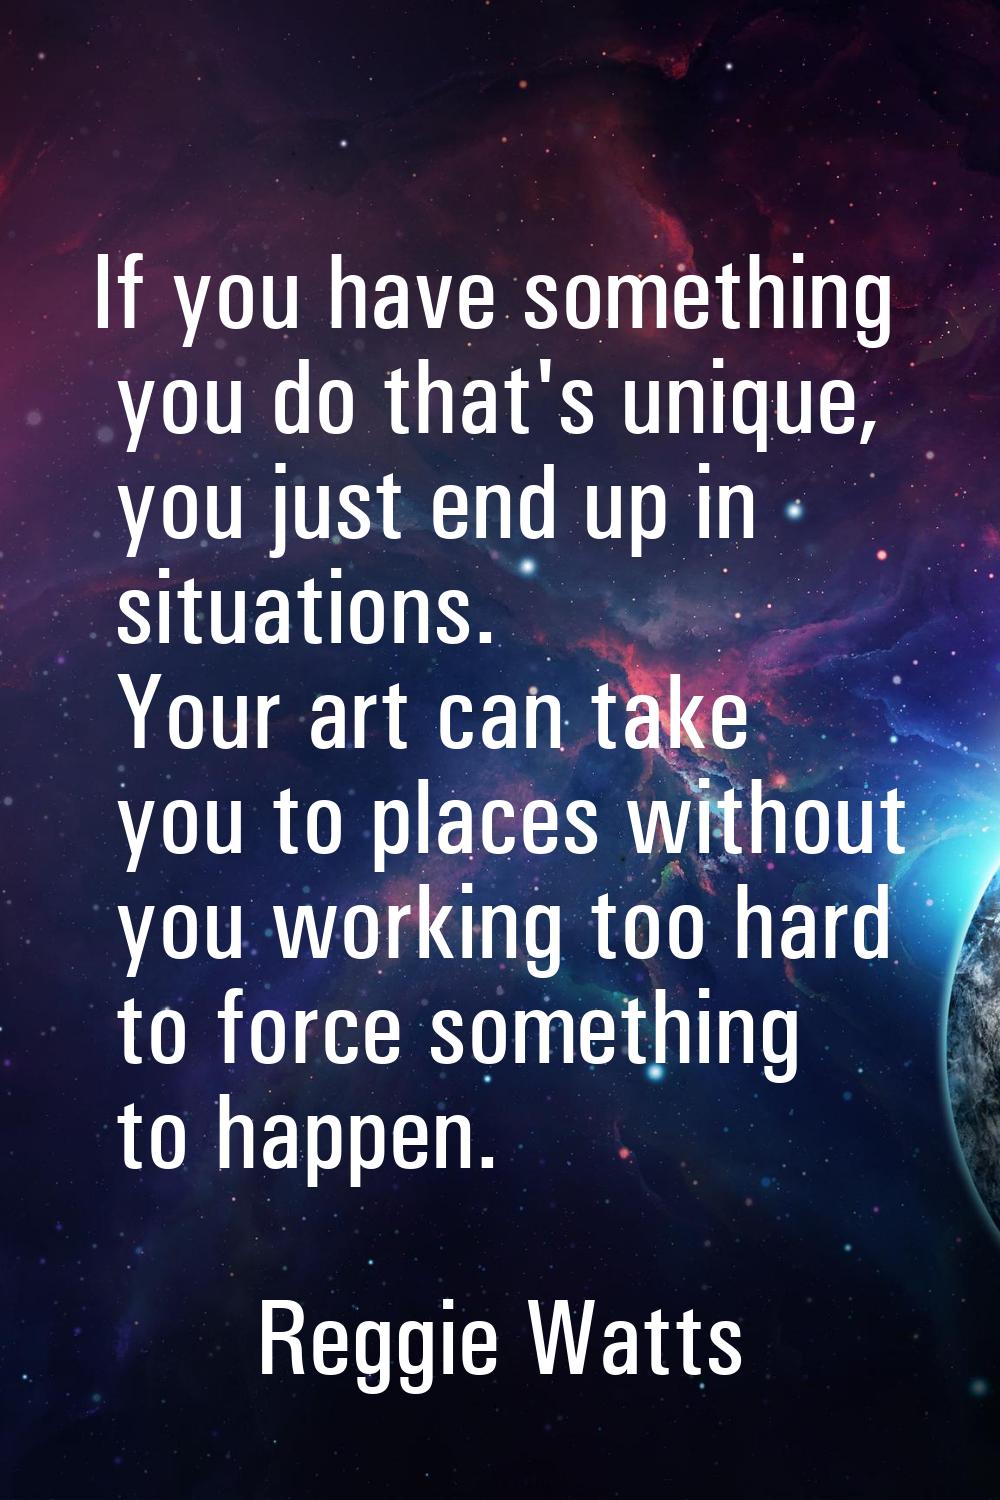 If you have something you do that's unique, you just end up in situations. Your art can take you to